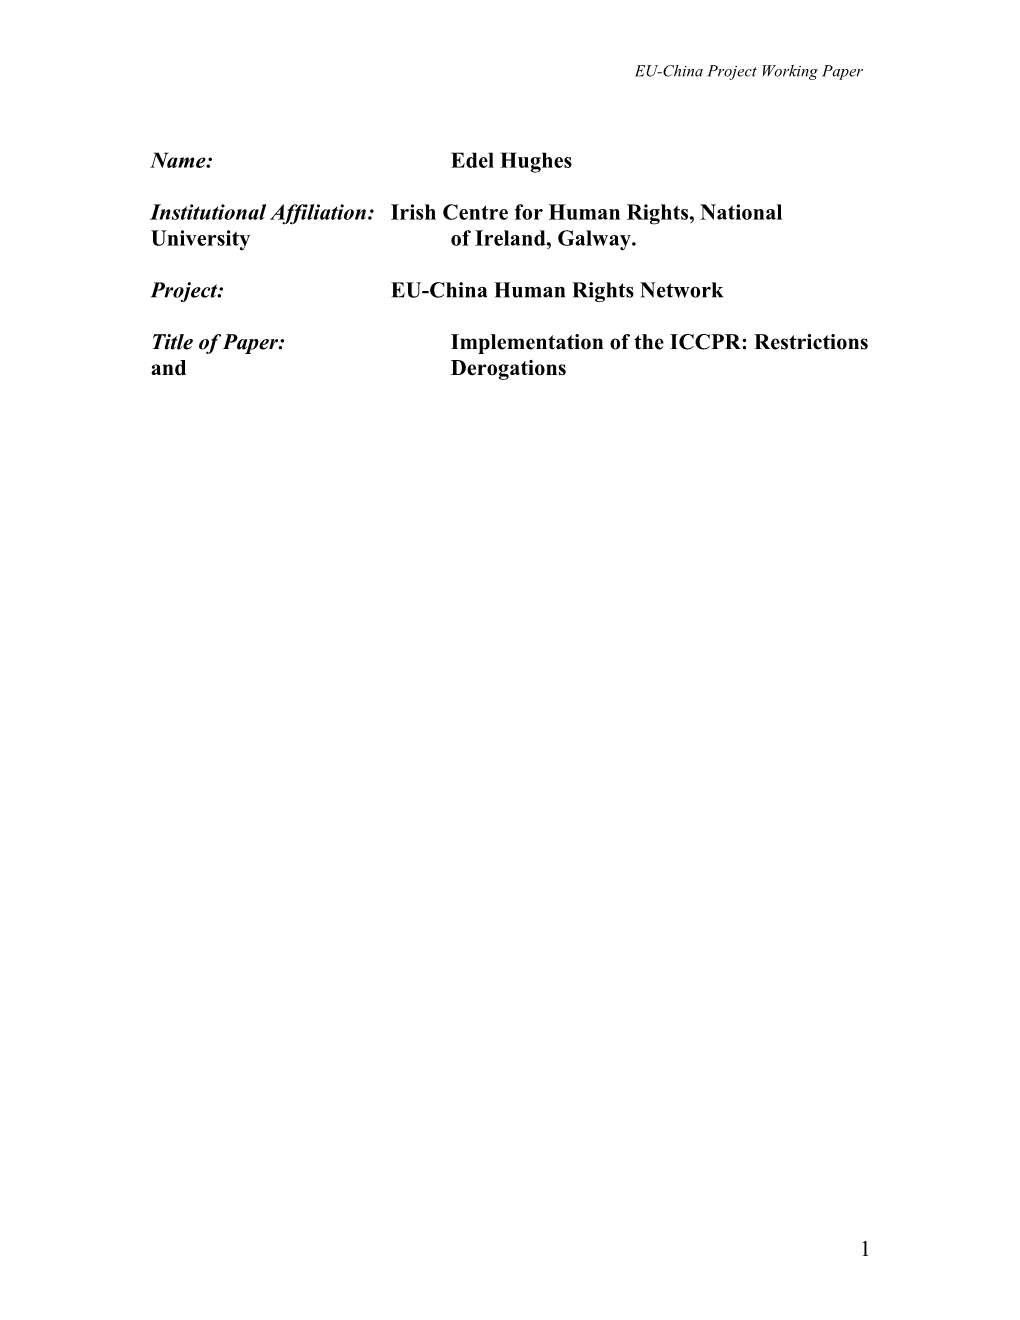 EU-China Working Paper: Implementation of the ICCPR: Restrictions and Derogations